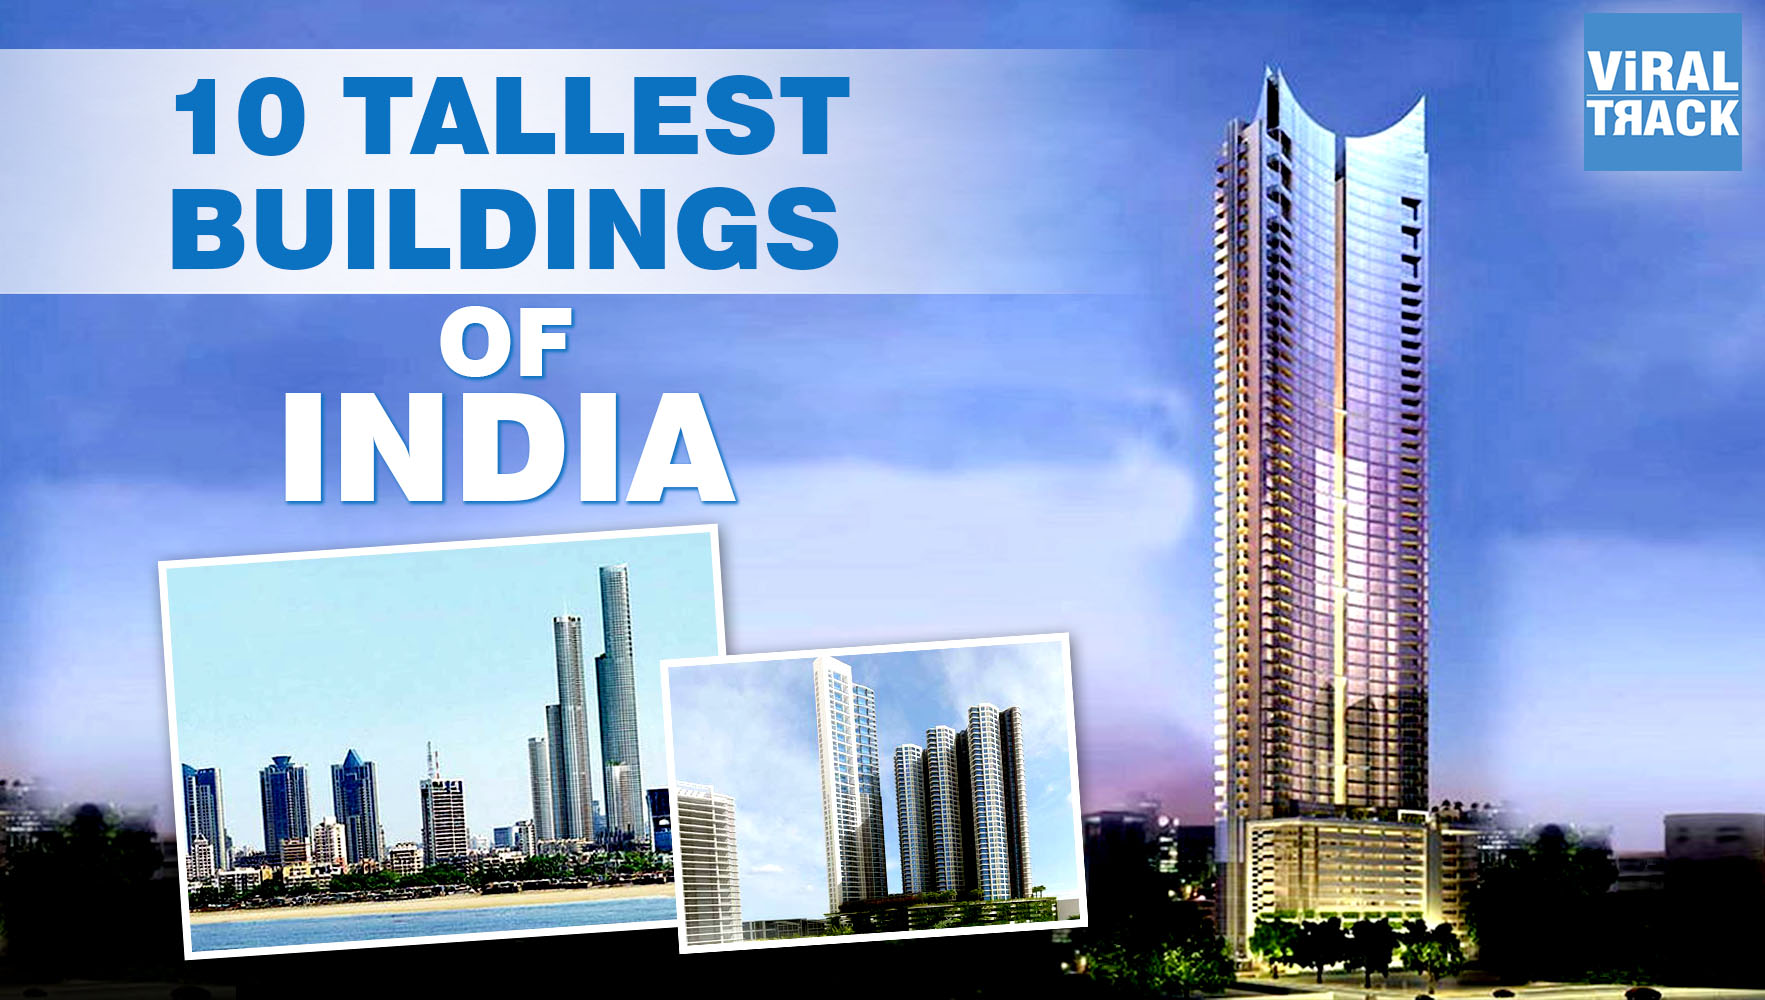 10 tallest buildings of india